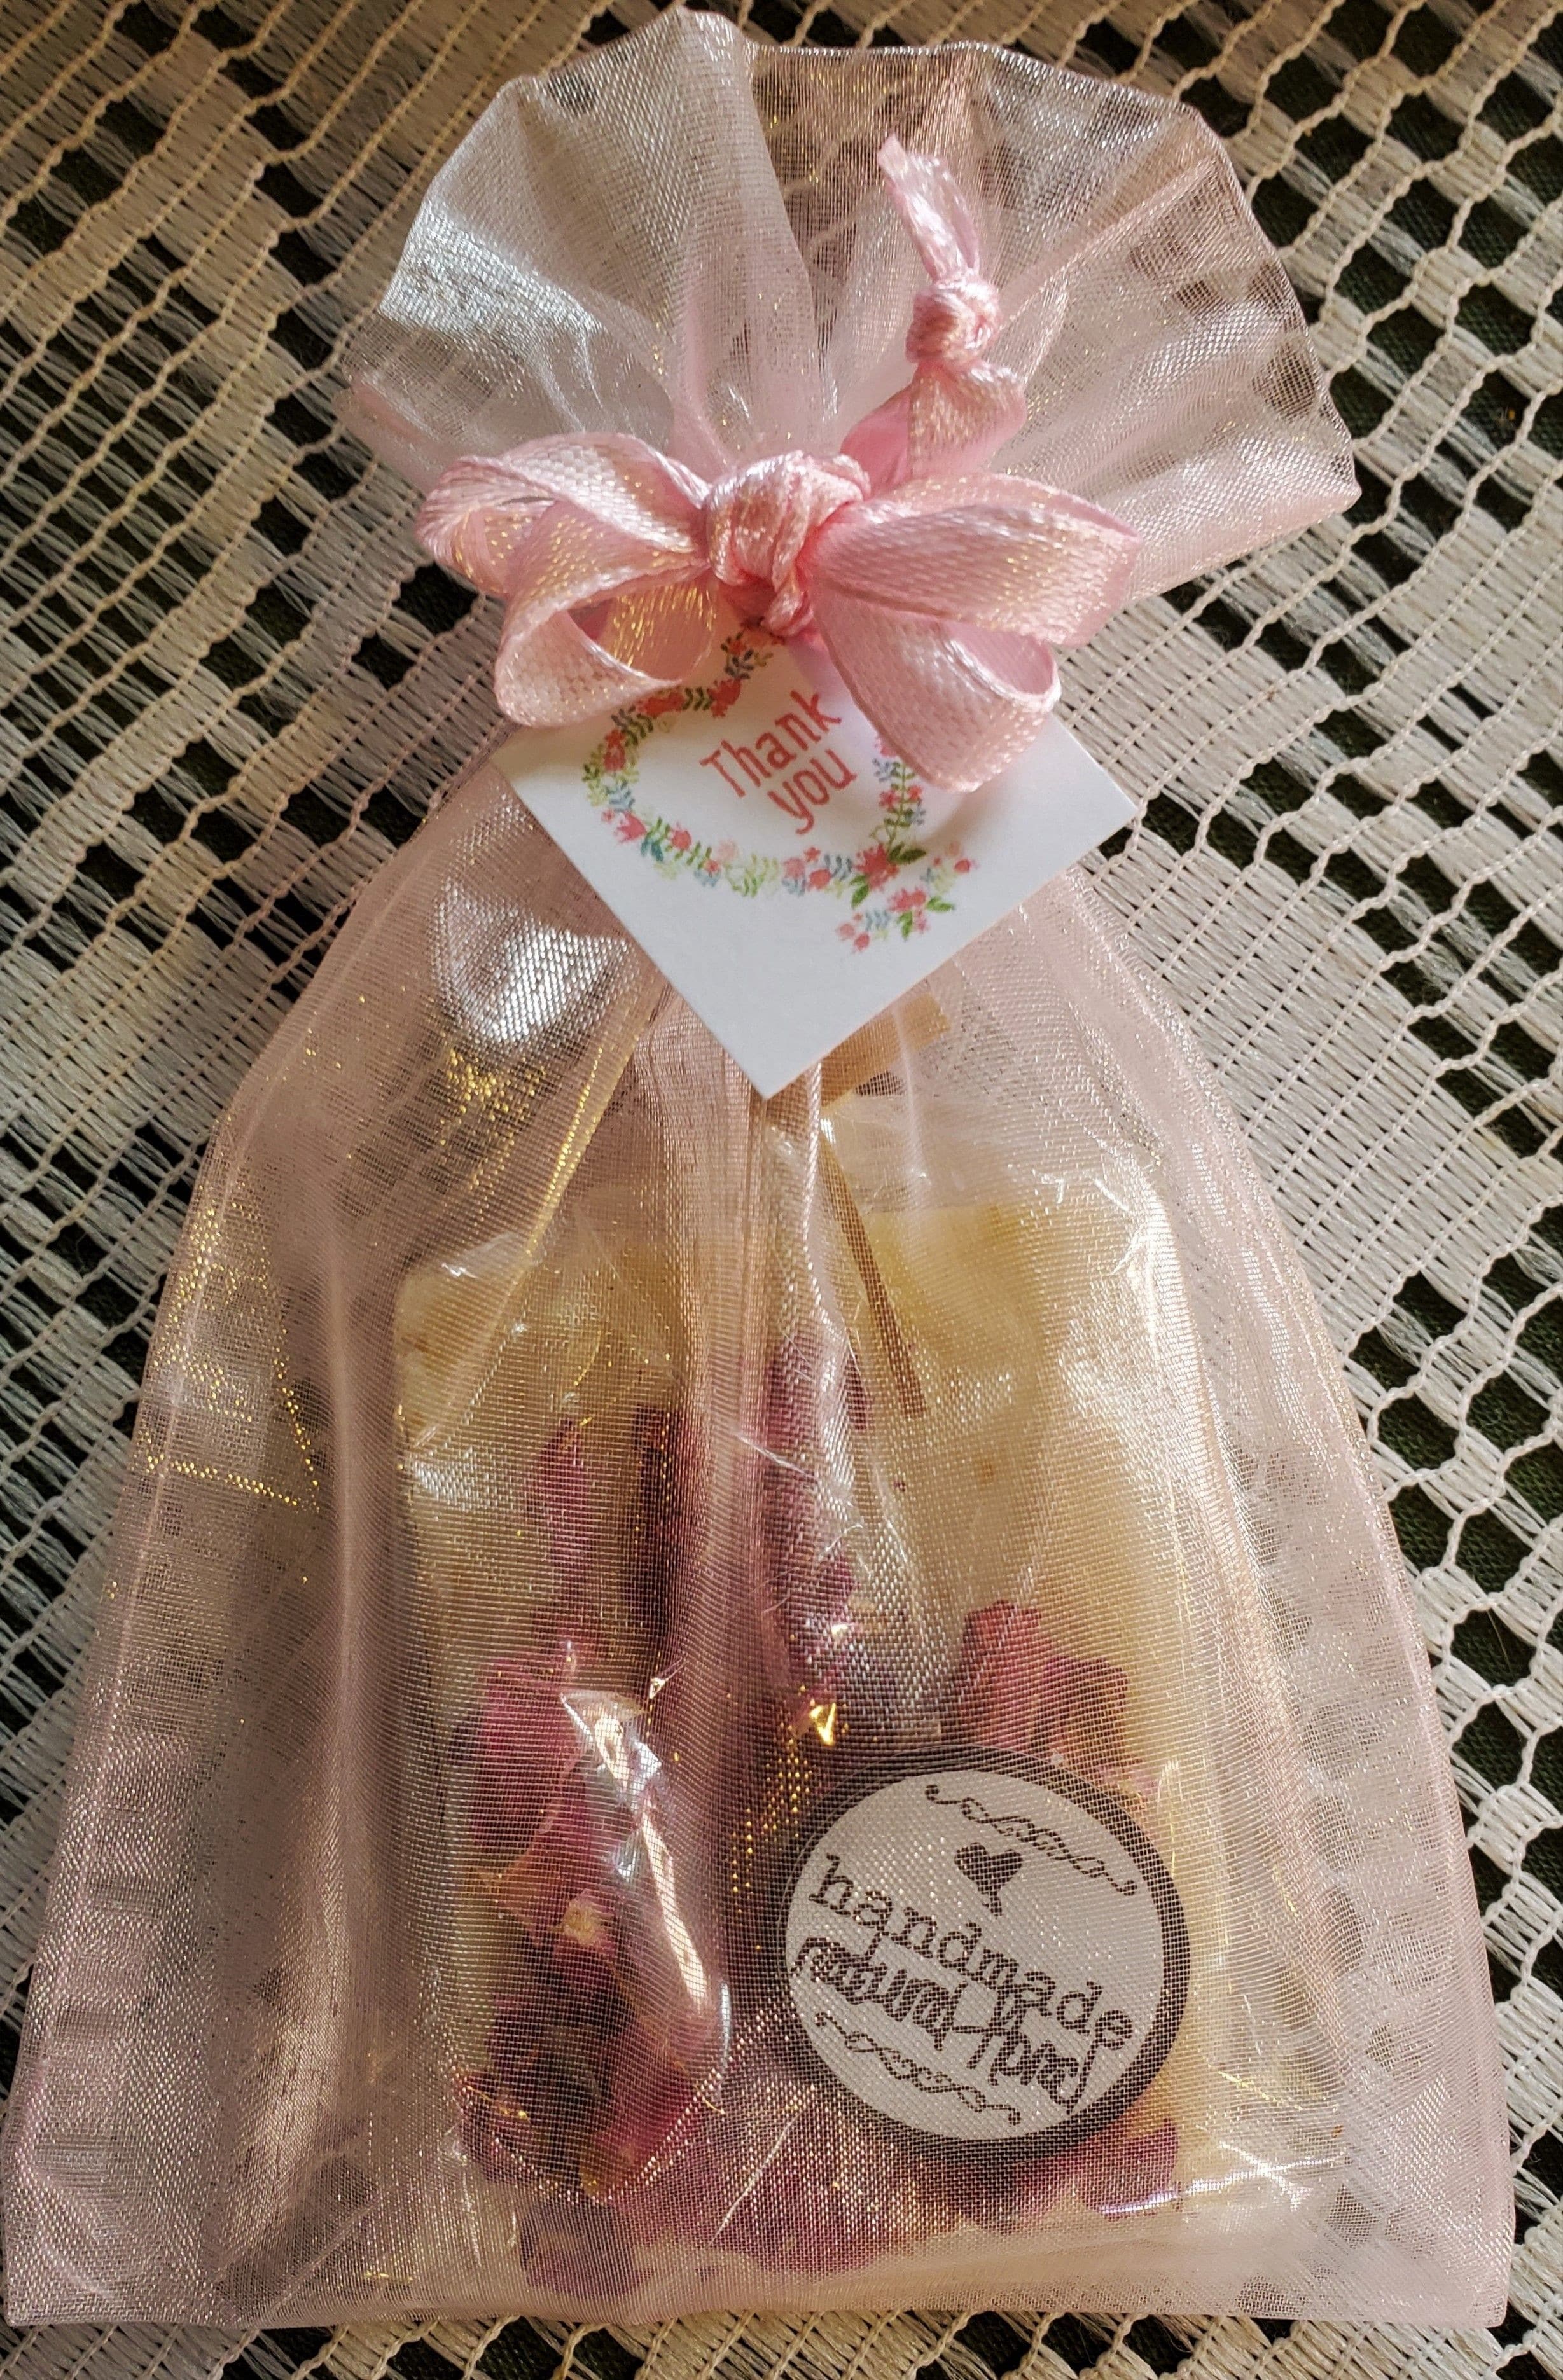 This premium soap favour is a beautiful blend of natural floral essential oils decorated with organic rose petals.  A beautiful and useful gift for your wedding